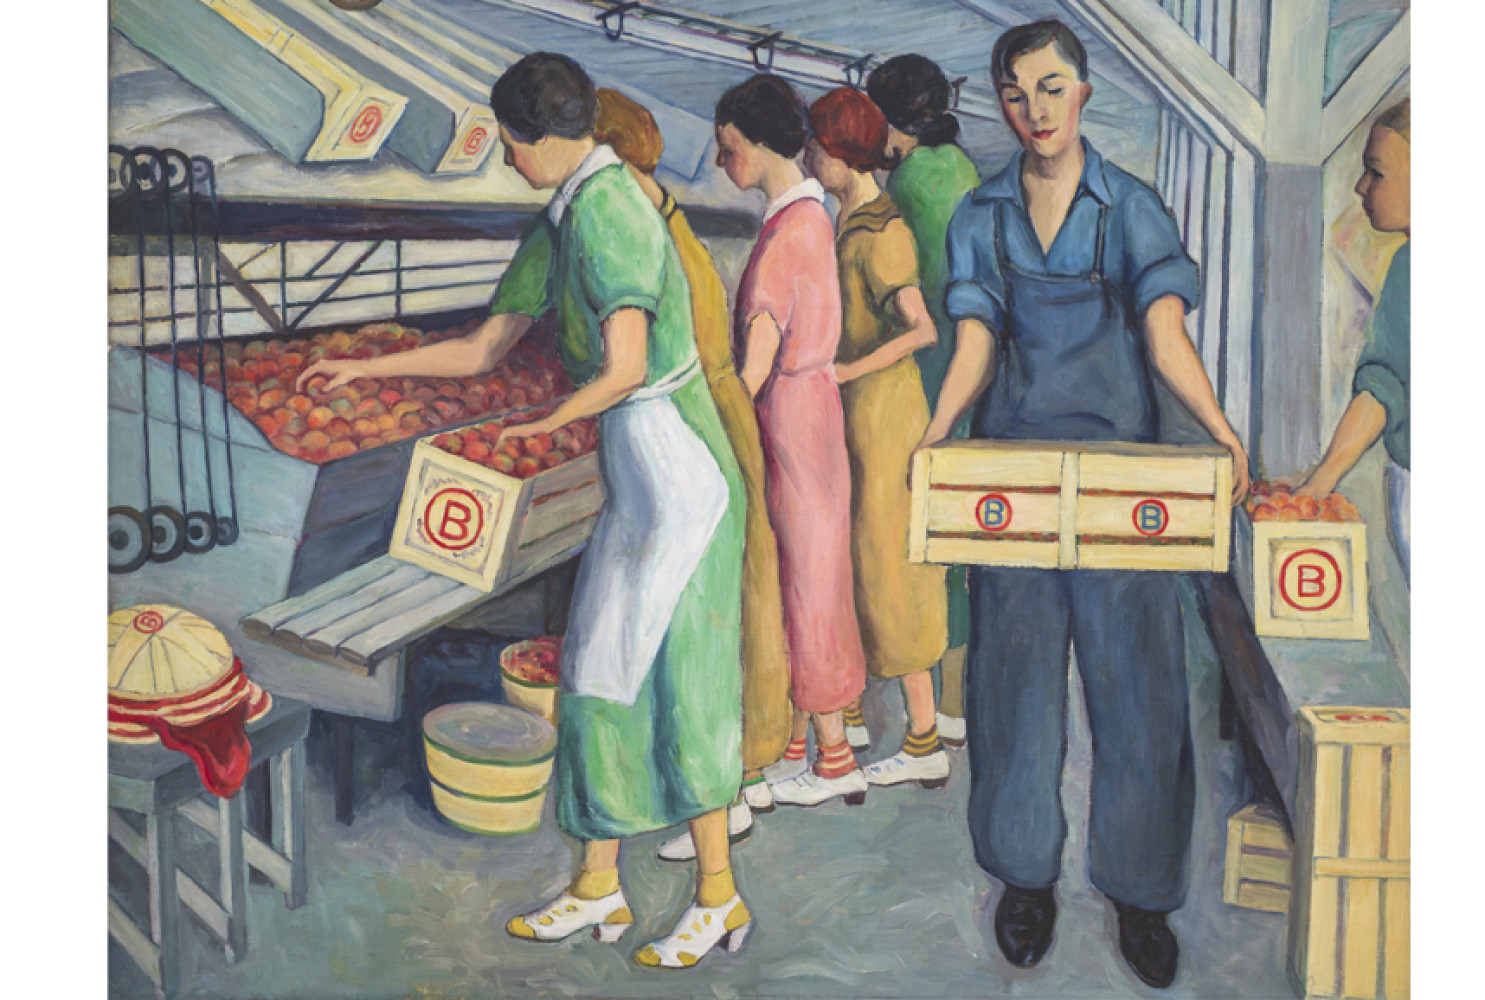 Peach Packing, Spartanburg County, 1938, By Wenonah Day Bell; (American, 1890—1981); Oil on canvas; 38 x 48 inches; 2010.05.04; The Johnson Collection, Spartanburg, SC
